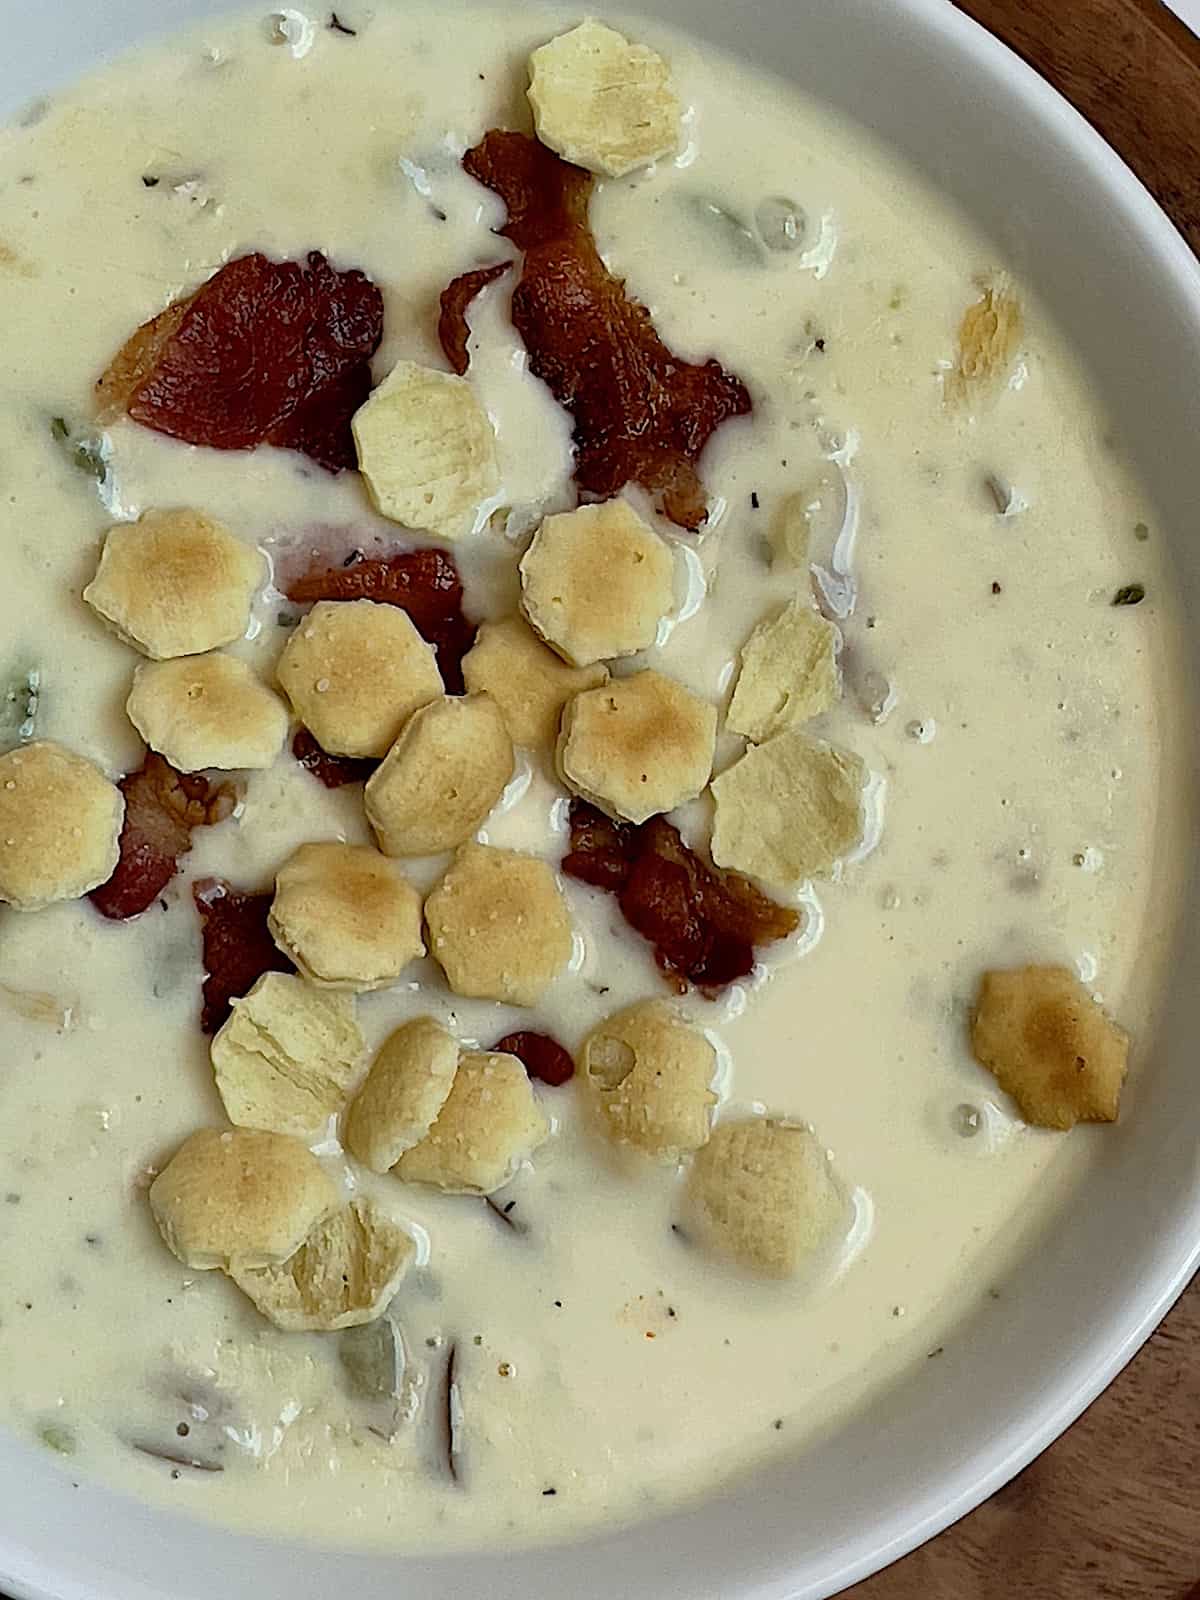 clam chowder topped with oyster crackers and bacon bits